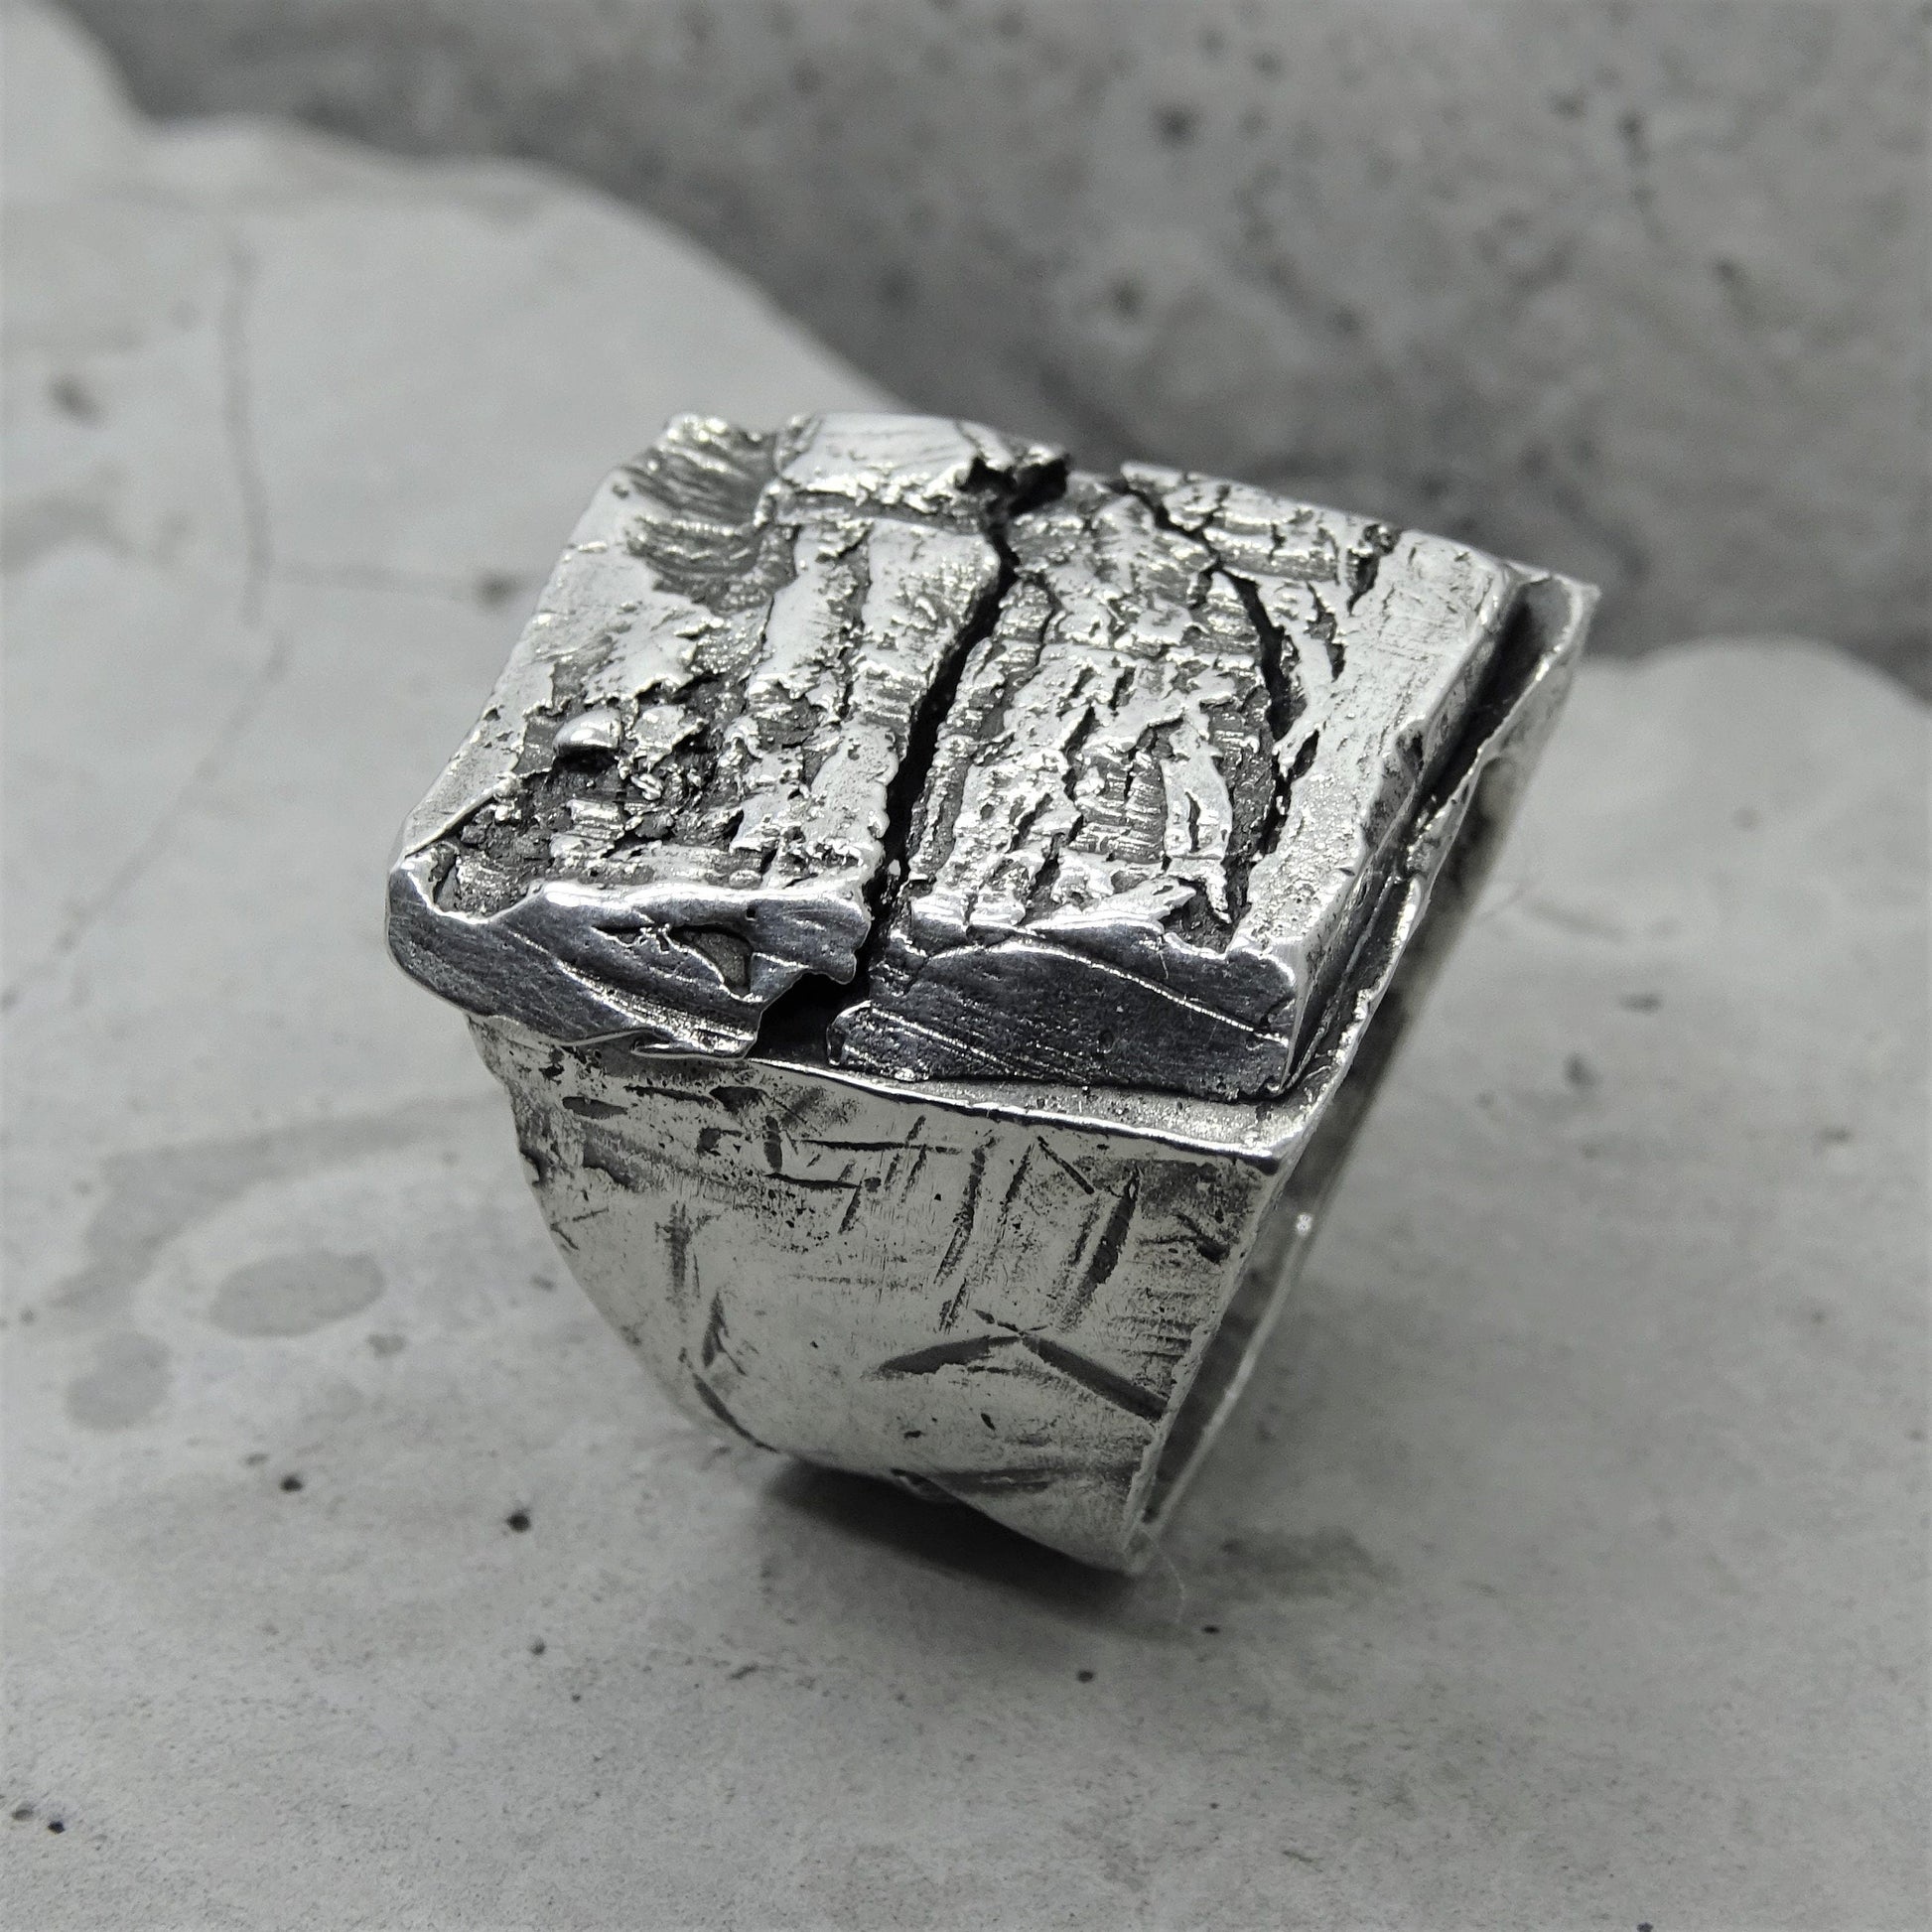 Plateau ring - unusual signet ring with cracks and chips Unusual rings Project50g 